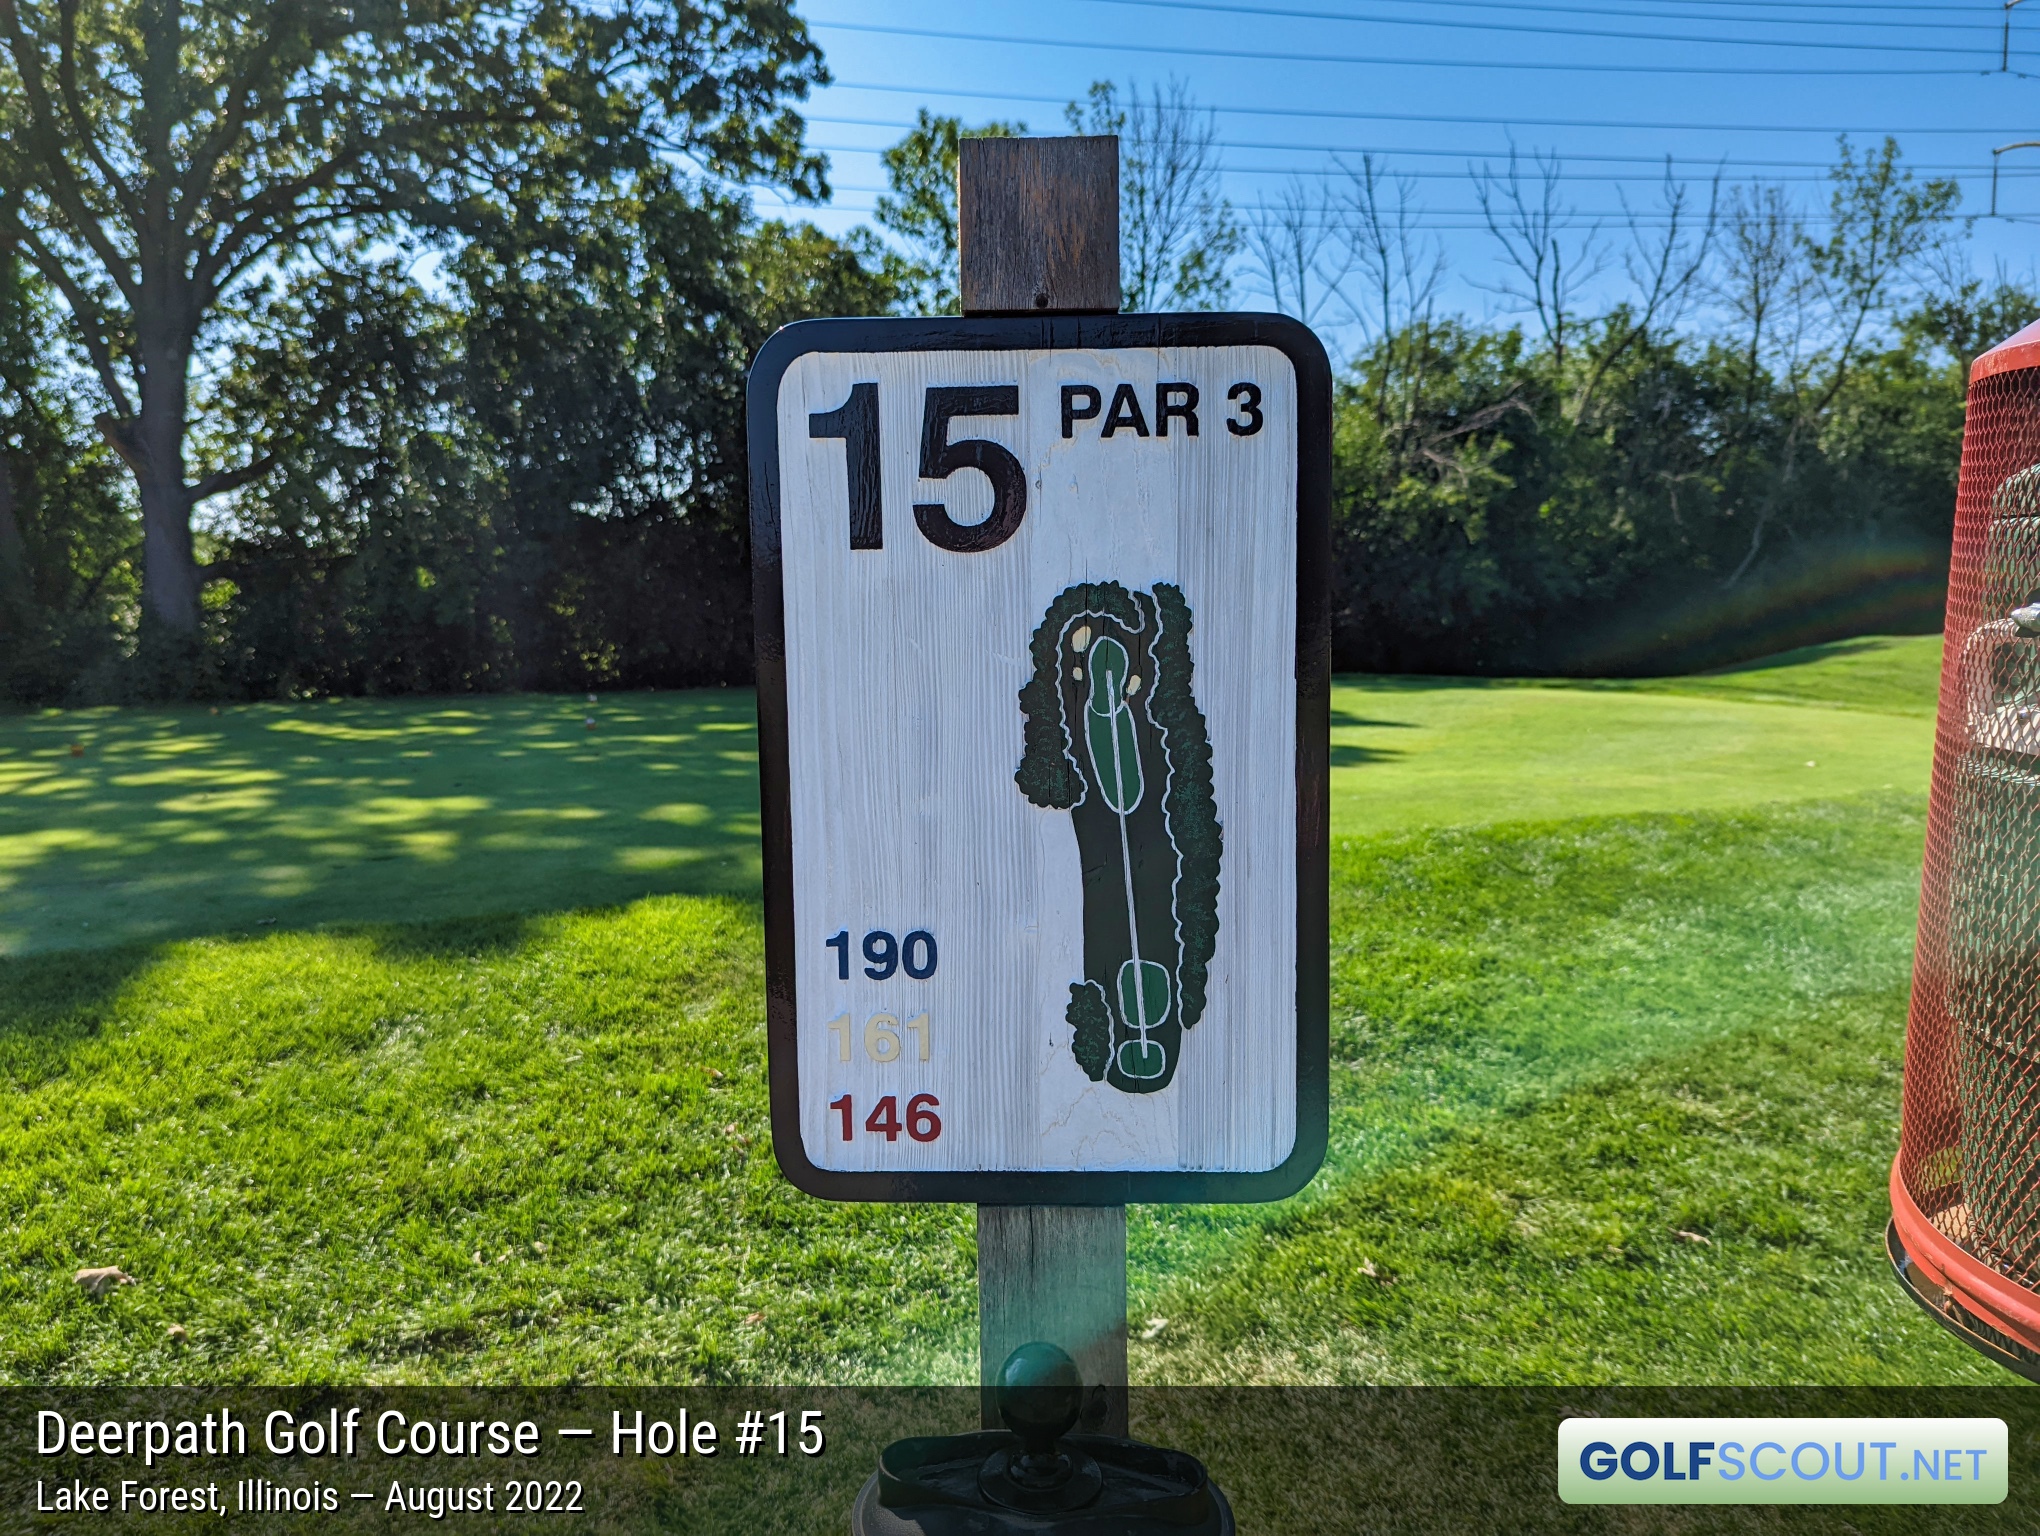 Photo of hole #15 at Deerpath Golf Course in Lake Forest, Illinois. 